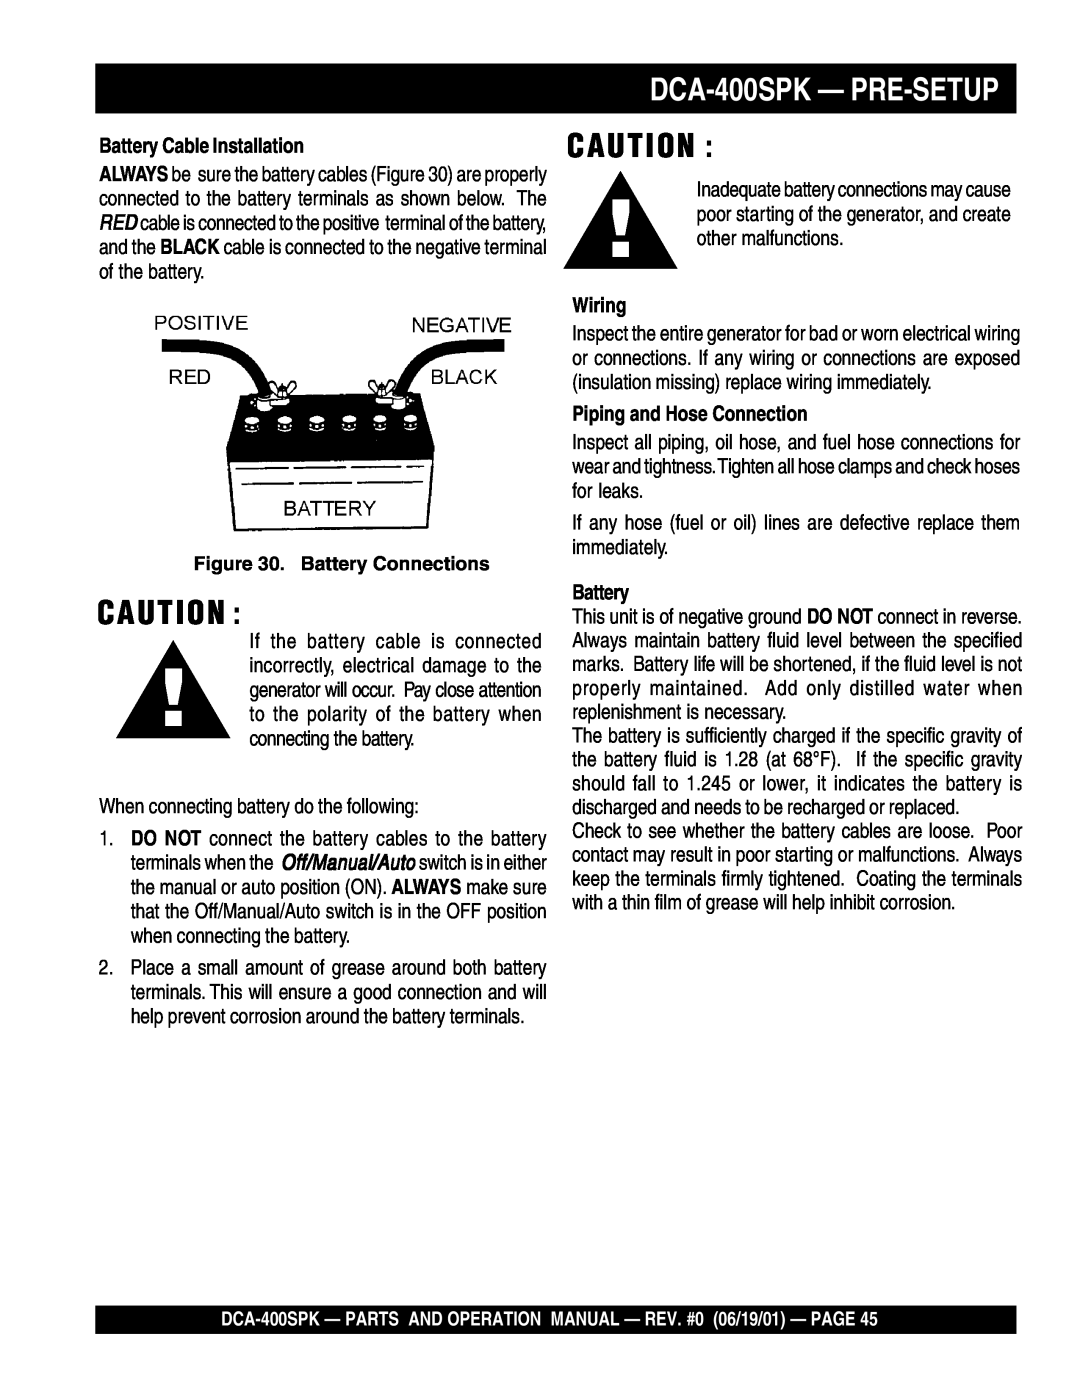 Multiquip operation manual DCA-400SPK- PRE-SETUP, Battery Cable Installation, Wiring, Piping and Hose Connection 